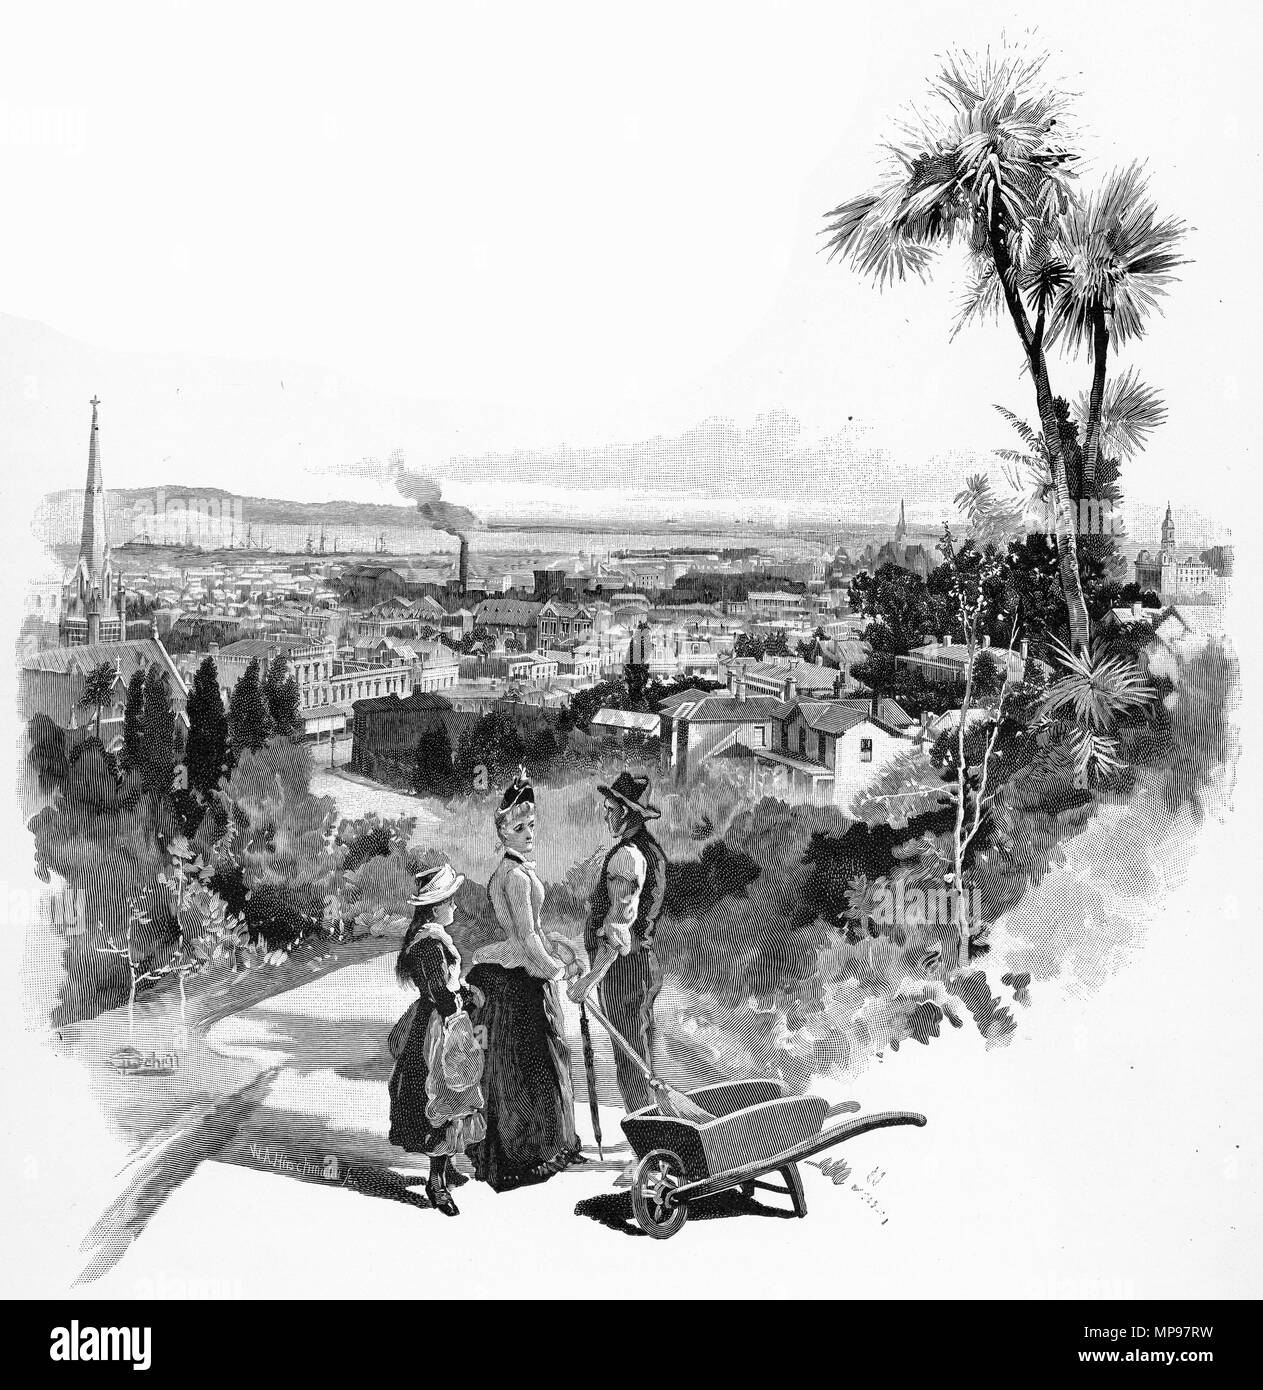 Engraving of a family enjoying the views over the city of Dunedin circa 1880, New Zealand. From the Picturesque Atlas of Australasia Vol 3, 1886 Stock Photo